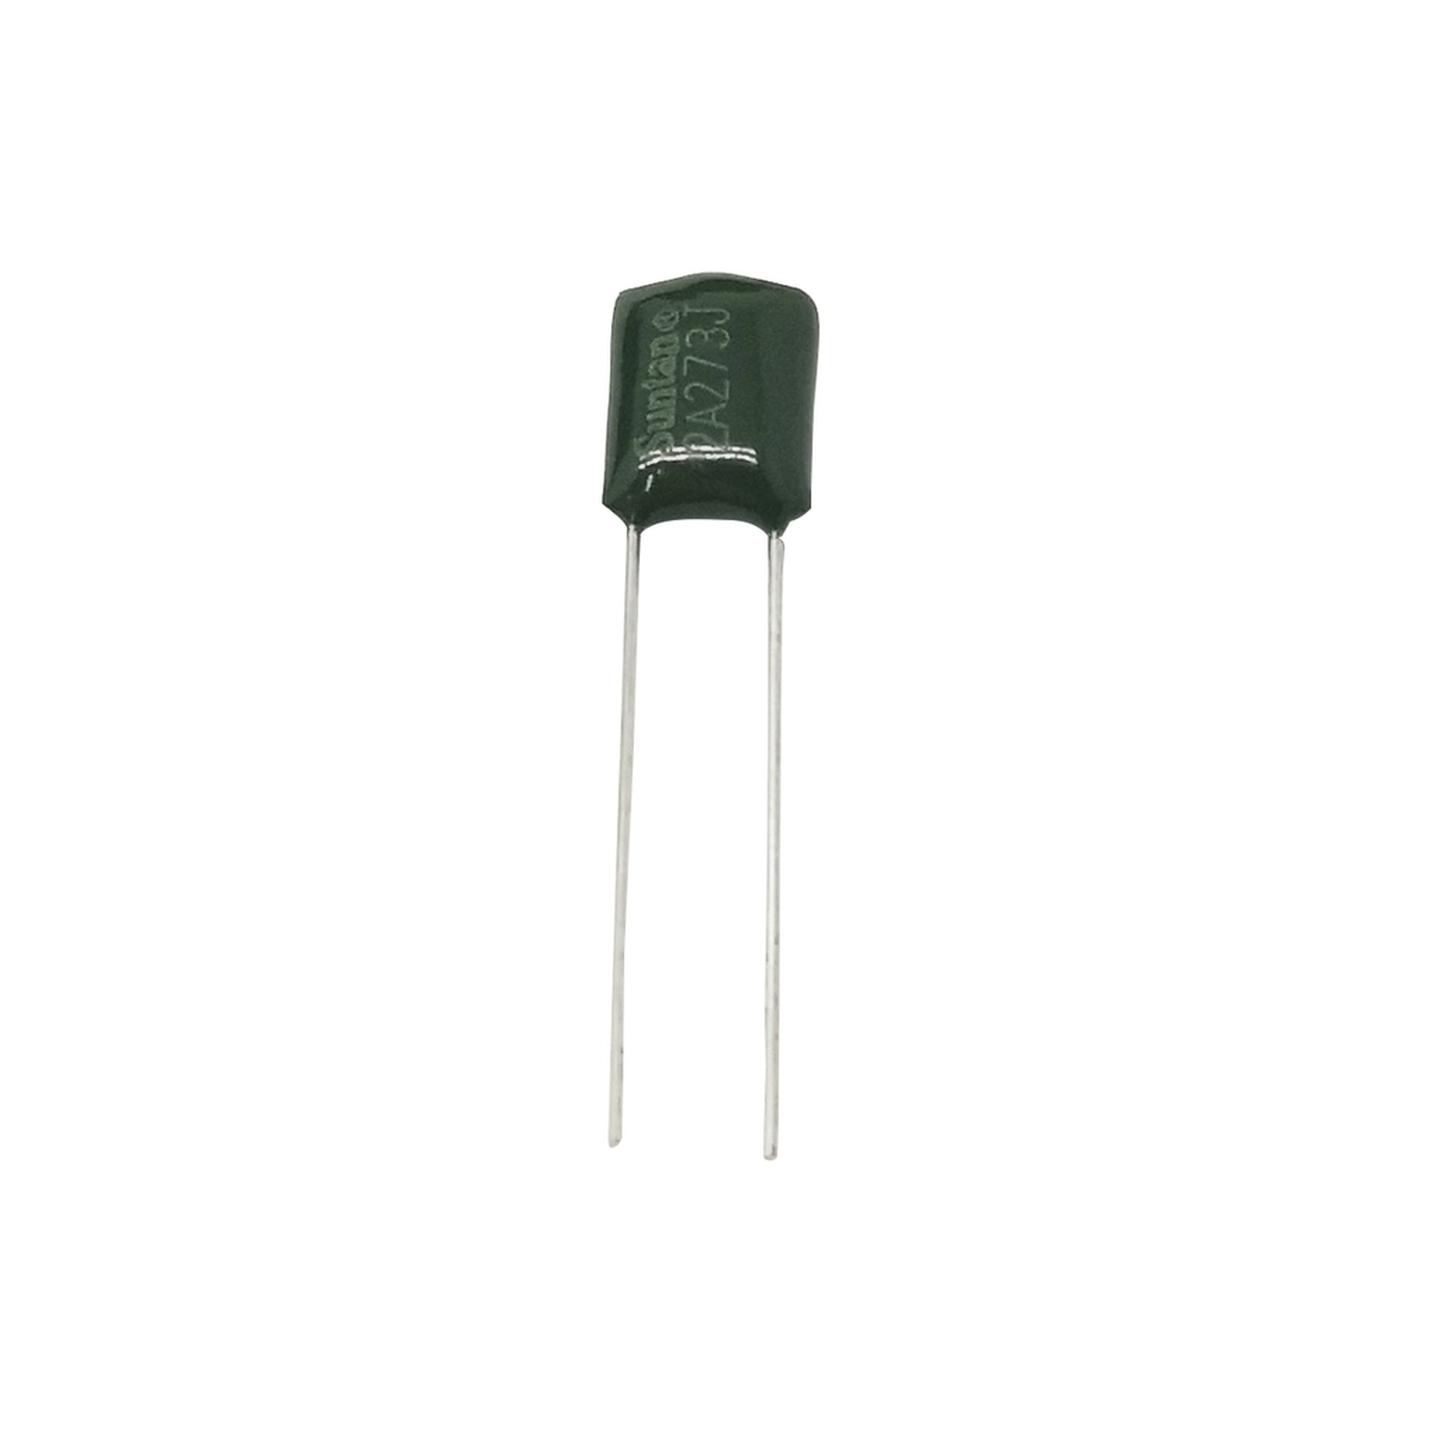 27nF 100VDC Polyester Capacitor